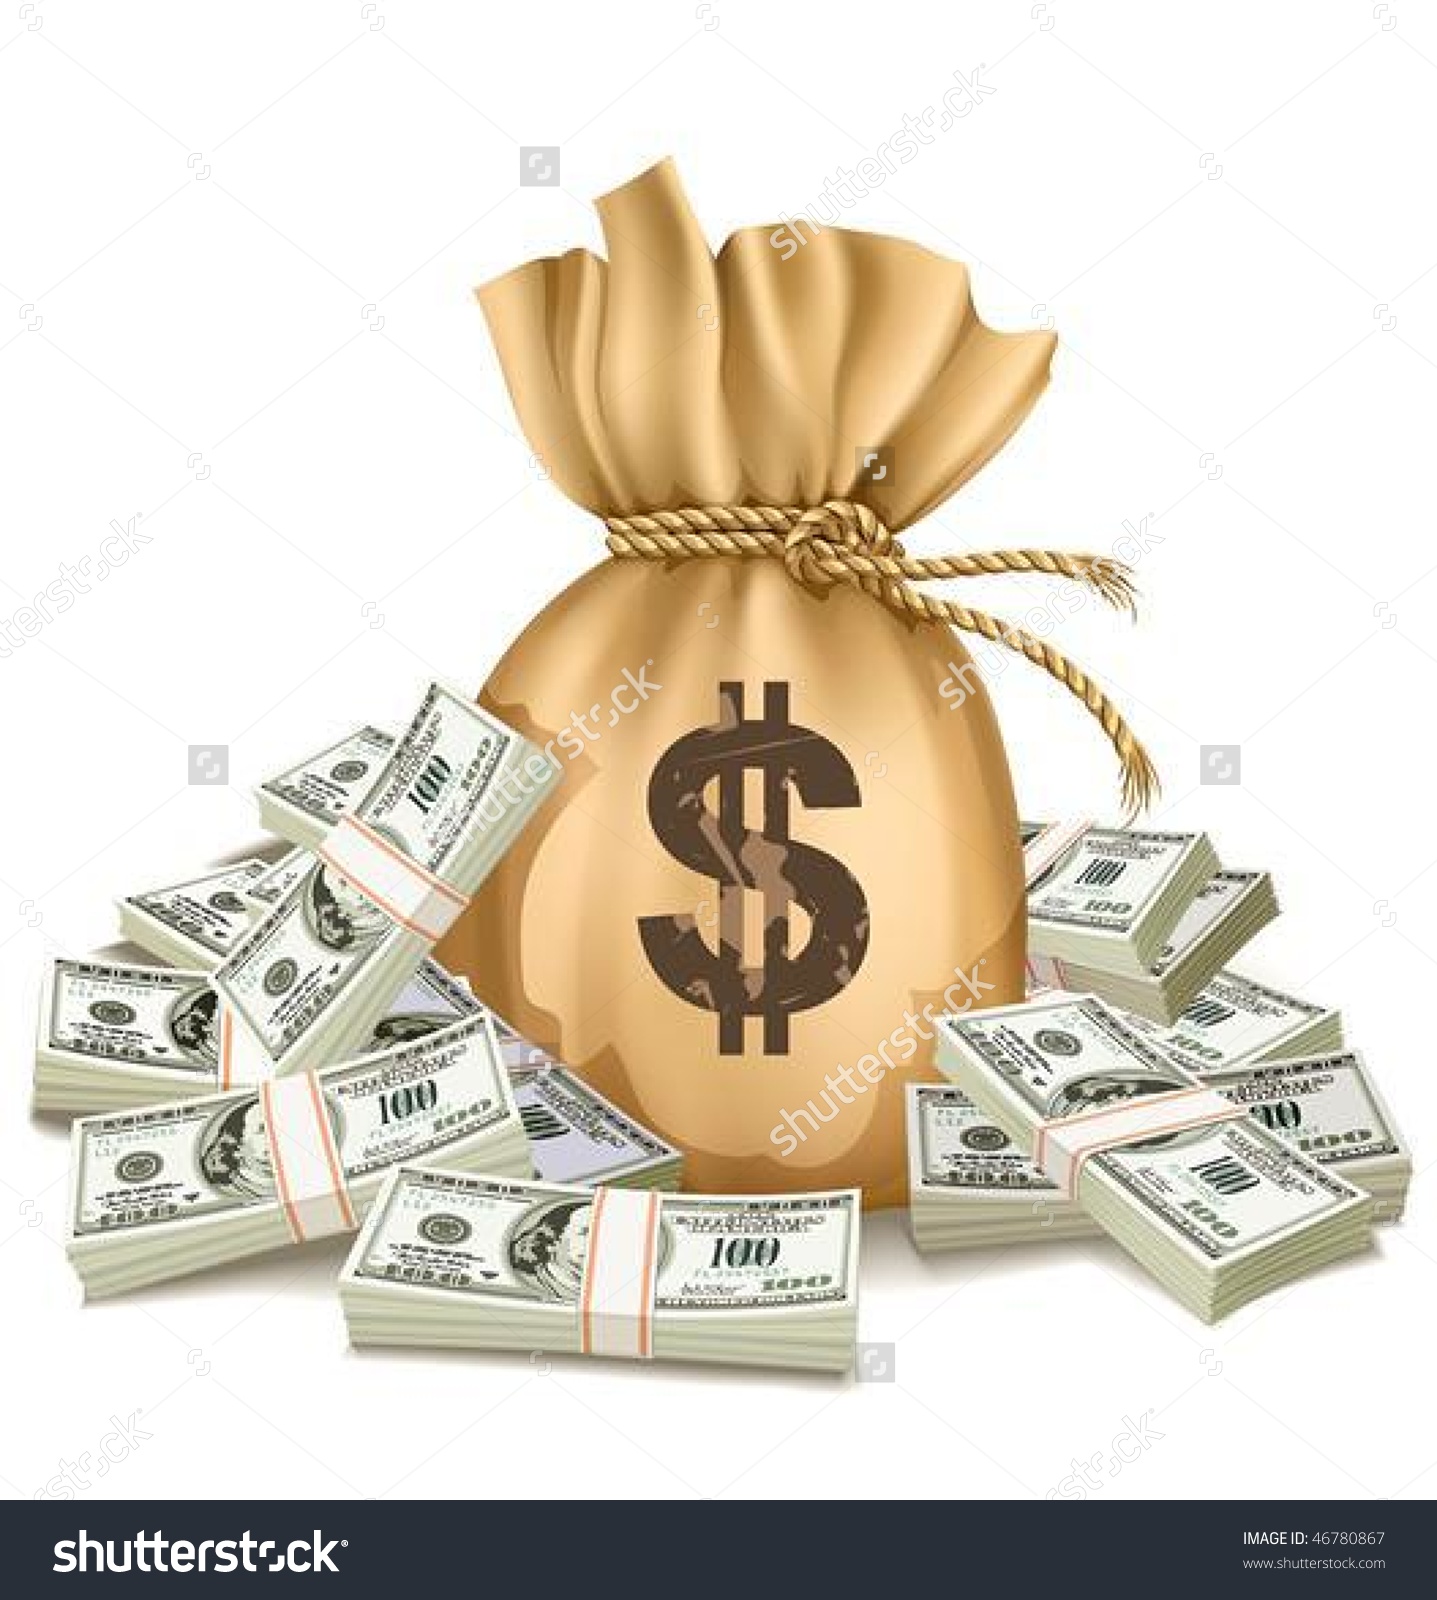 stock-vector-bag-with-packs-of-dollars-money-vector-illustration-isolated-on-white-background-46780867